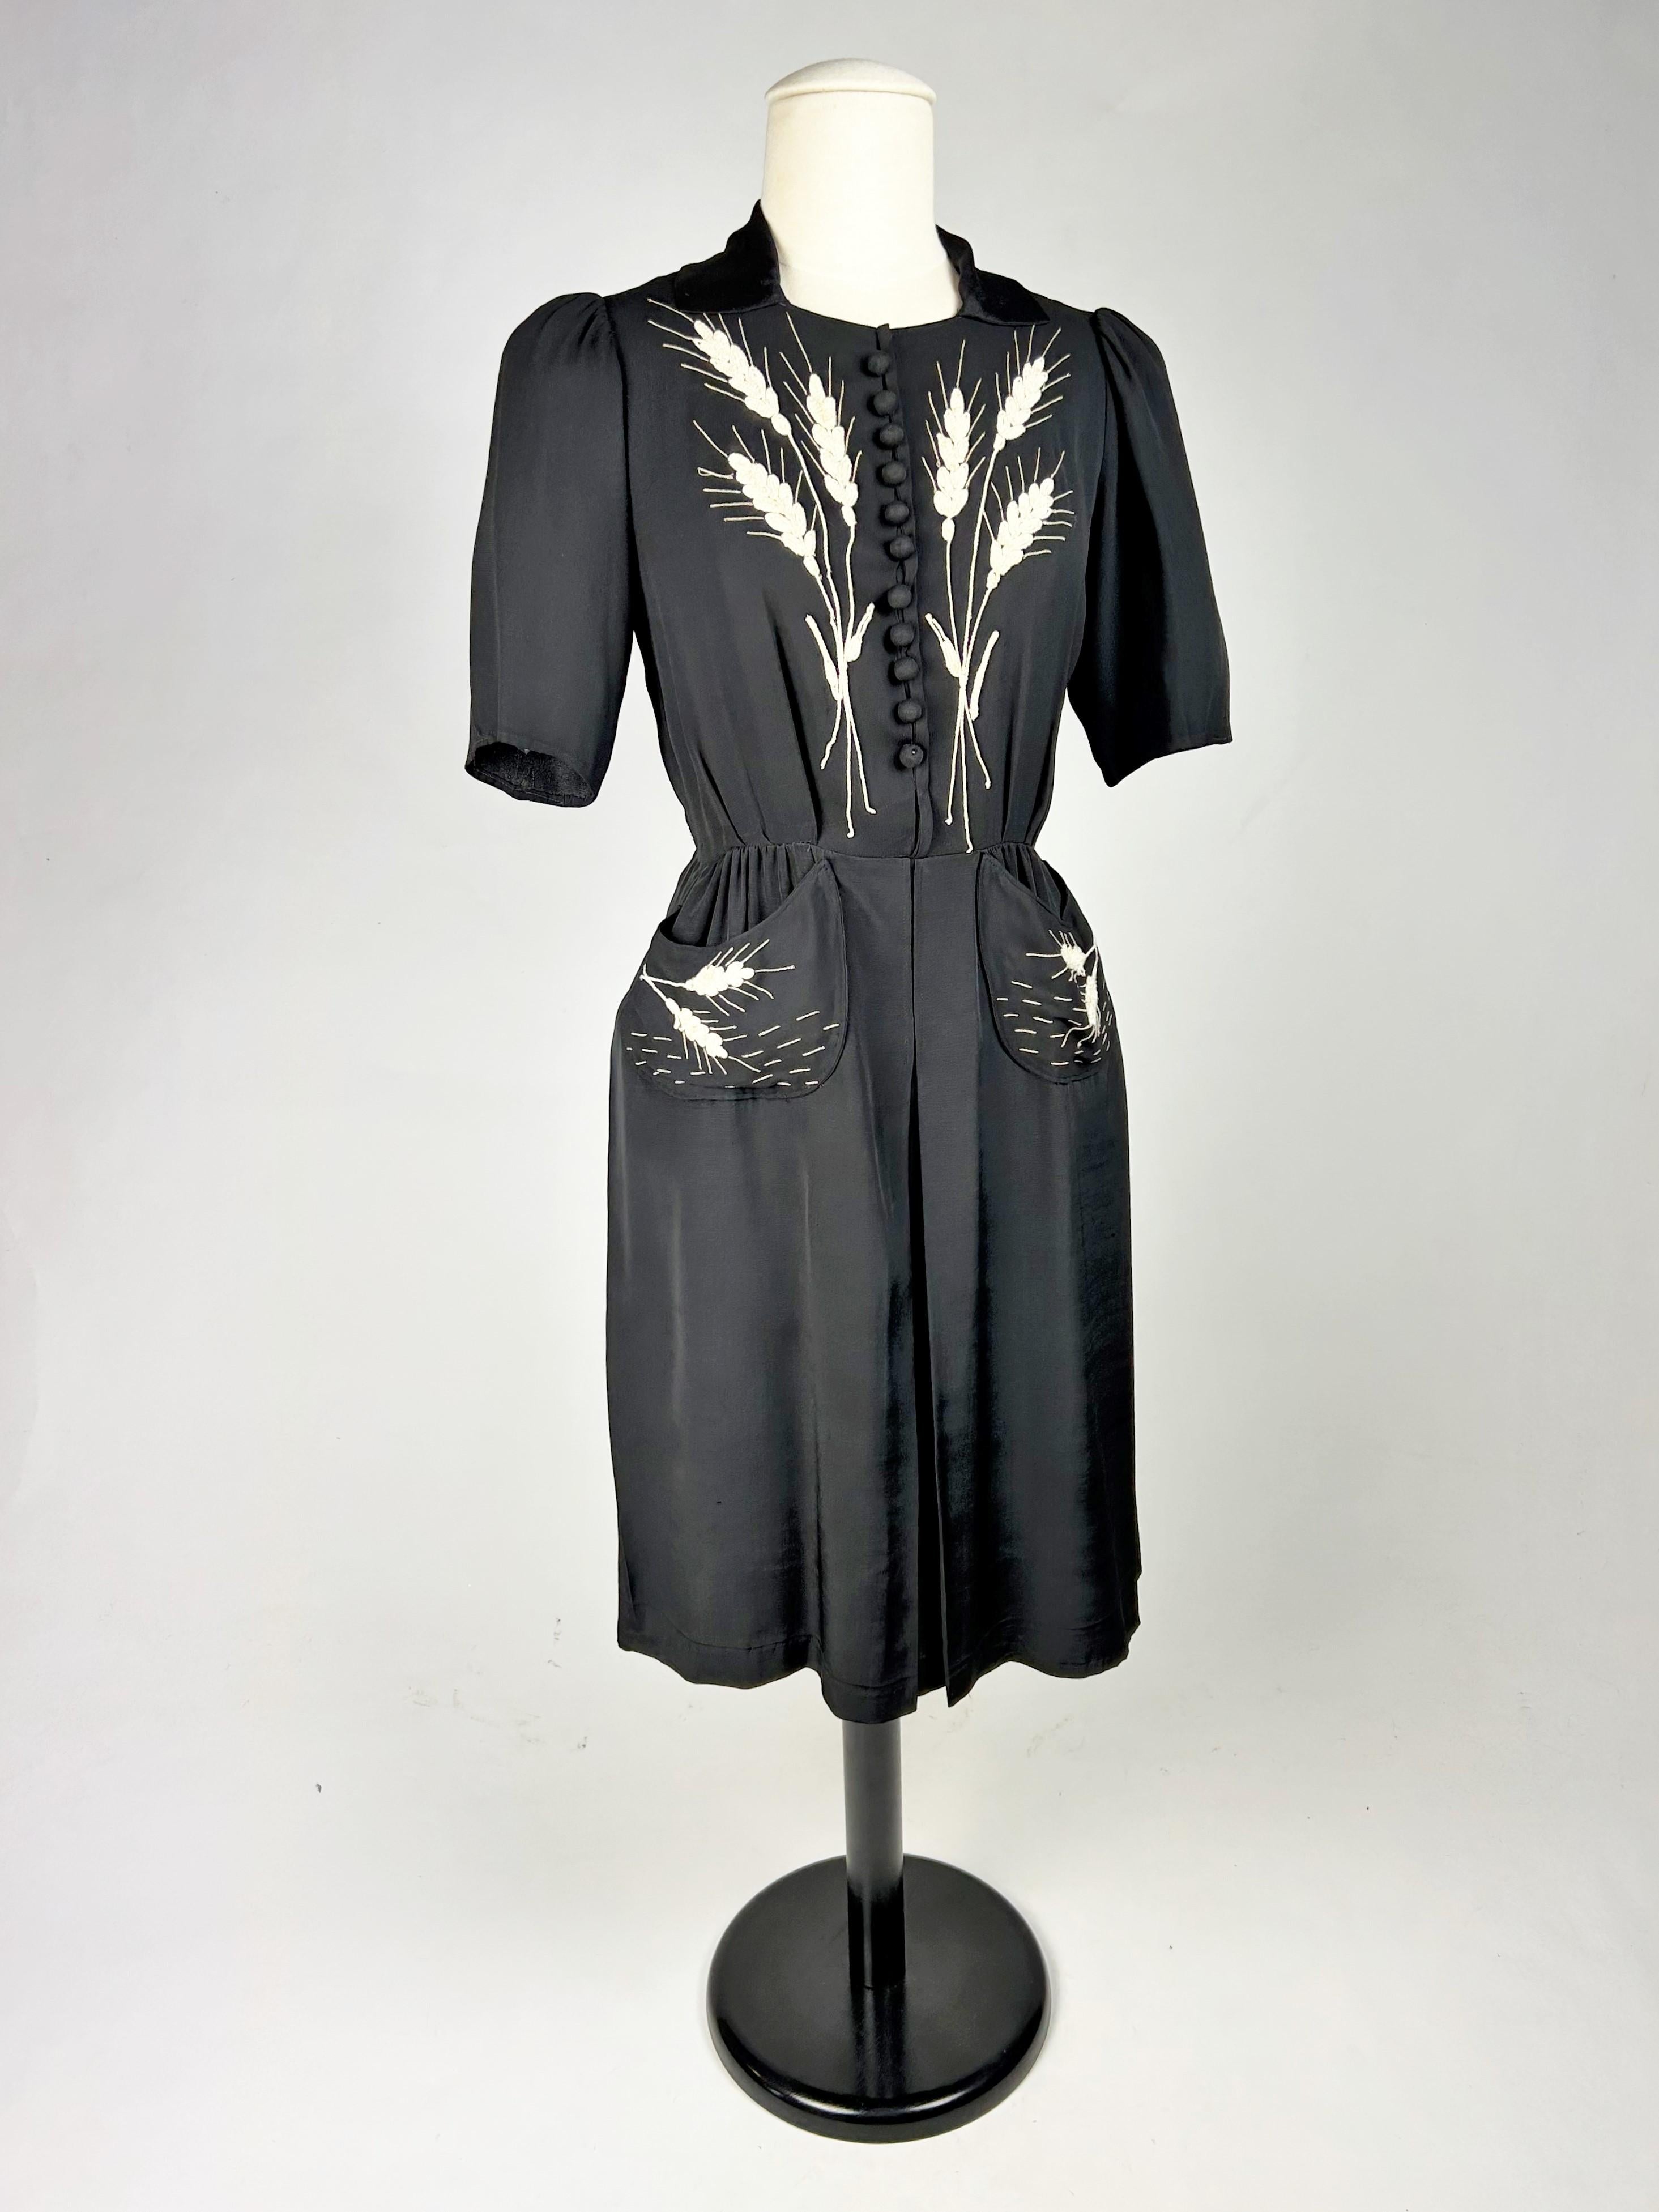 Circa 1943- 1945

France

Interesting little black dress with embroidered white ears of wheat, unmarked and dating from the end of the Second World War. Strapless dress in black crepe, with short sleeves and a small collar with turned-down points.